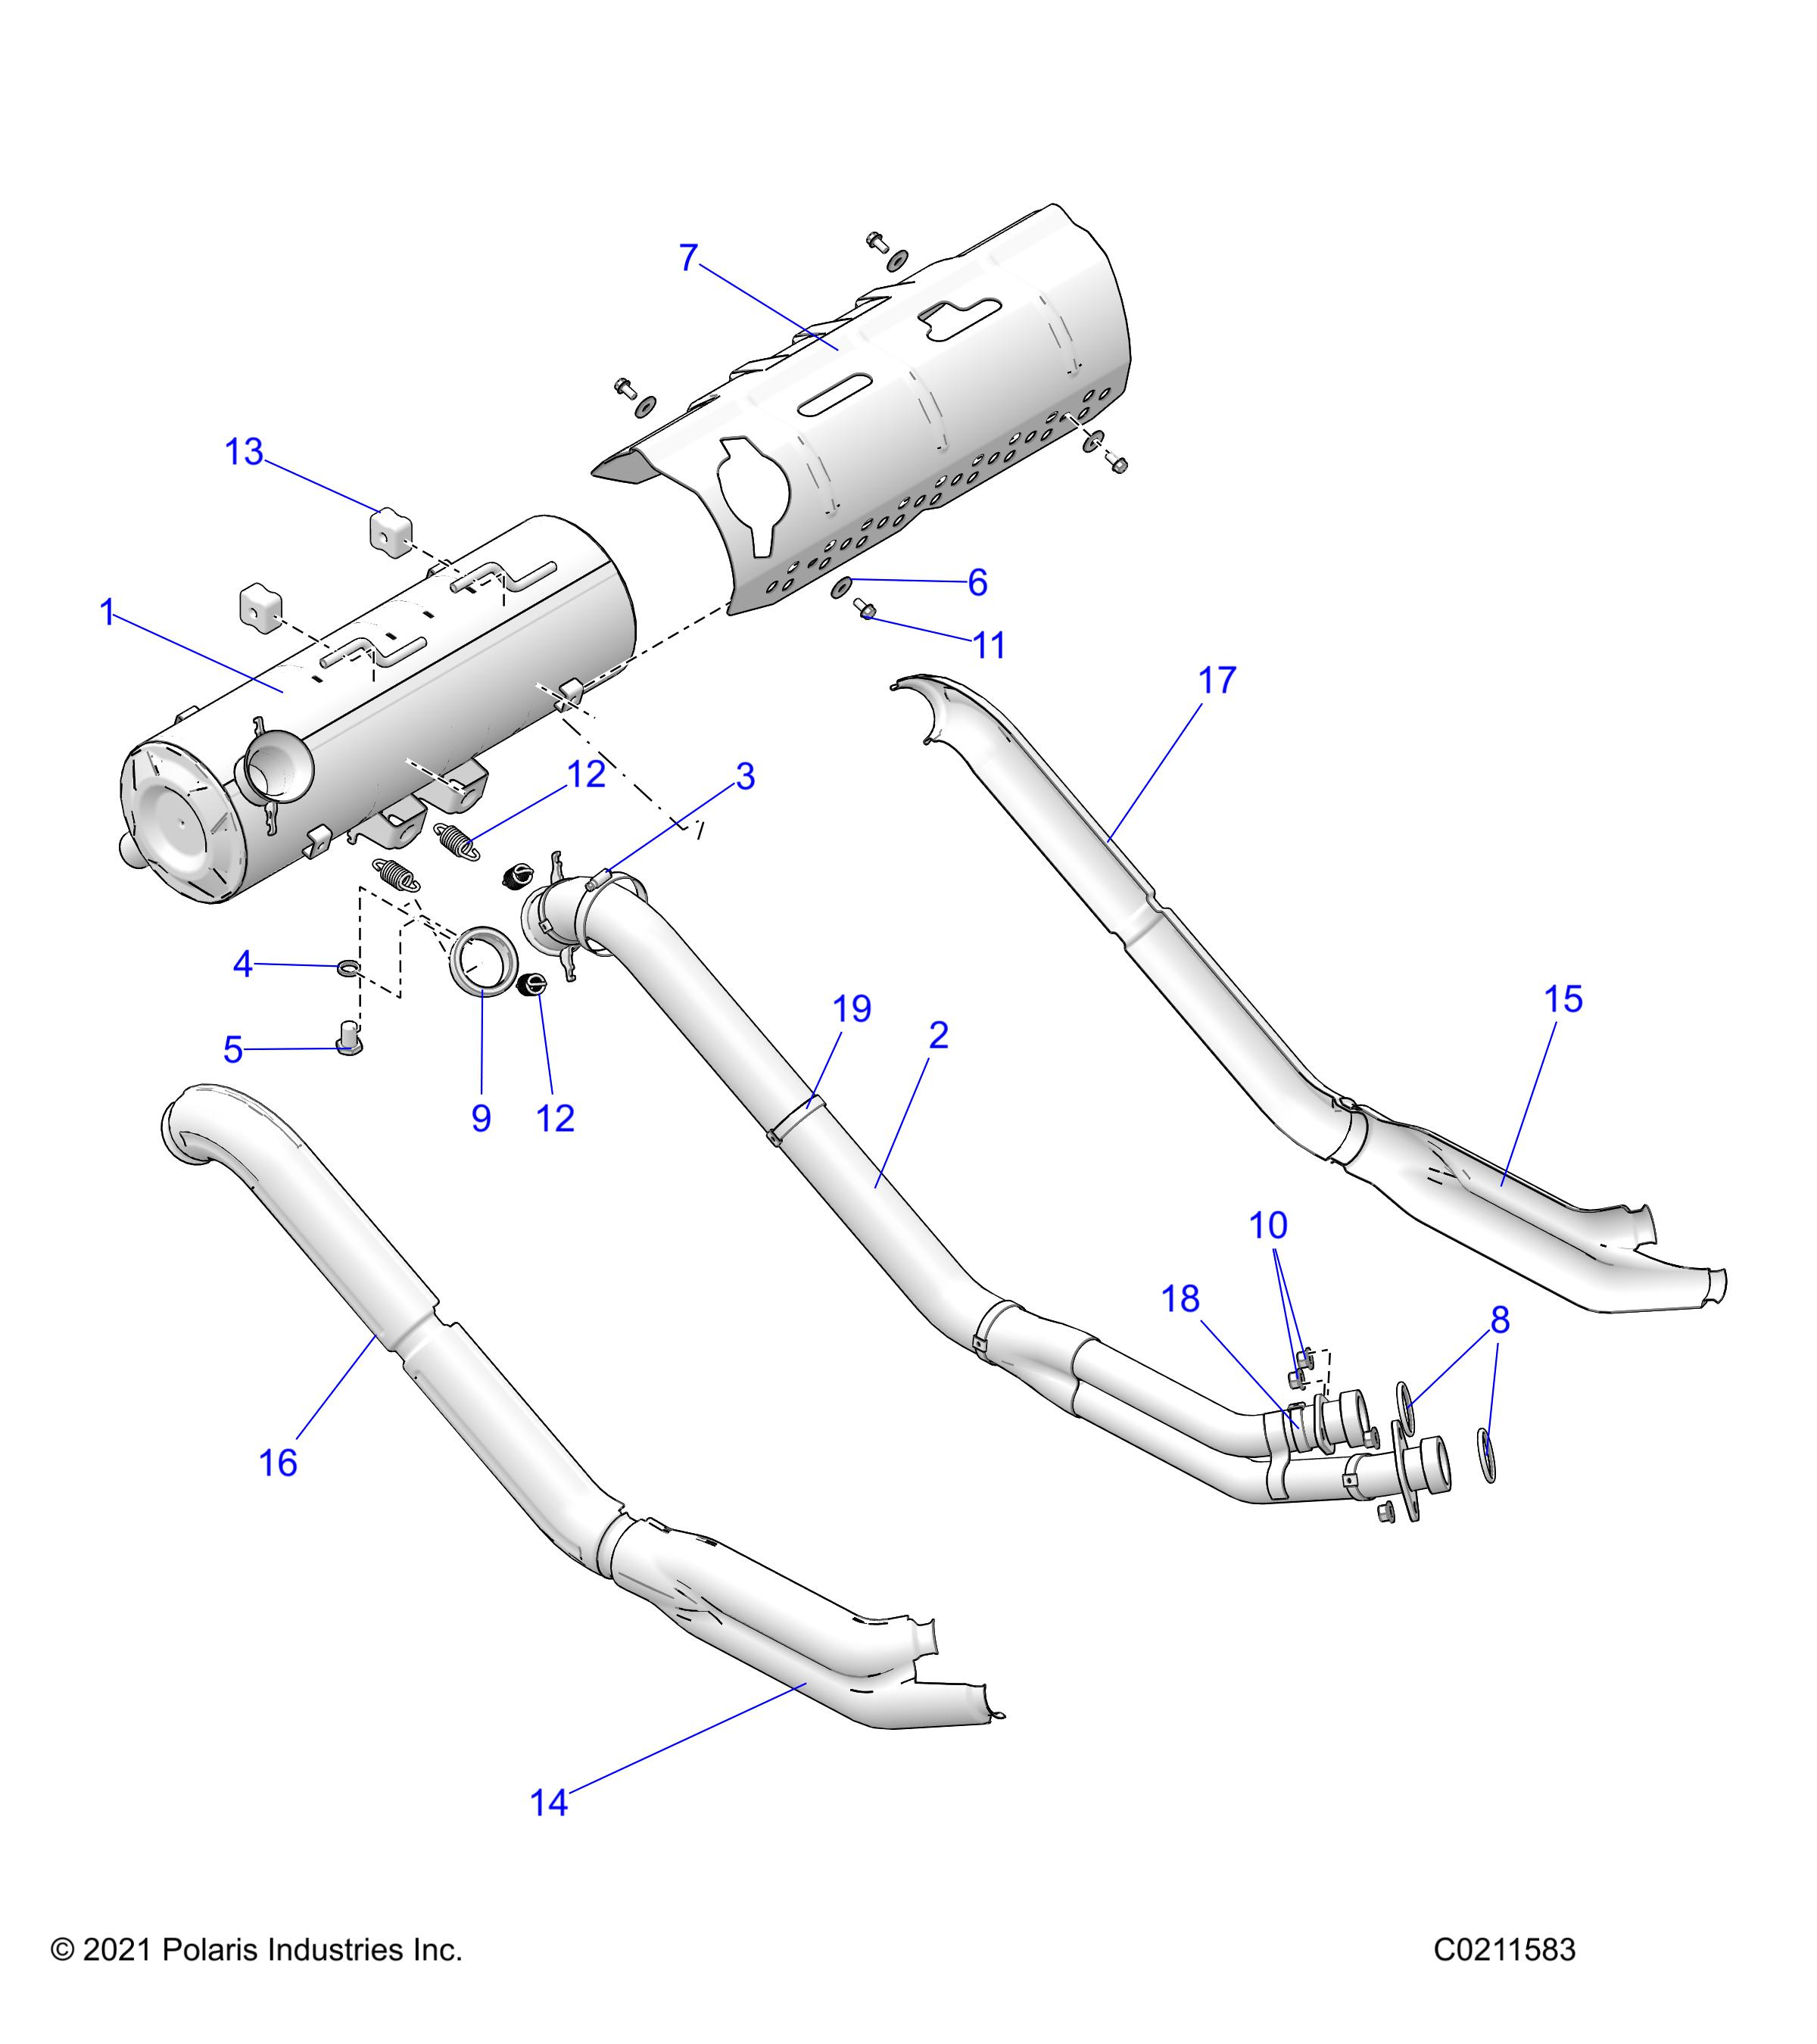 Part Number : 1263070 EXHAUST PIPE ASSEMBLY